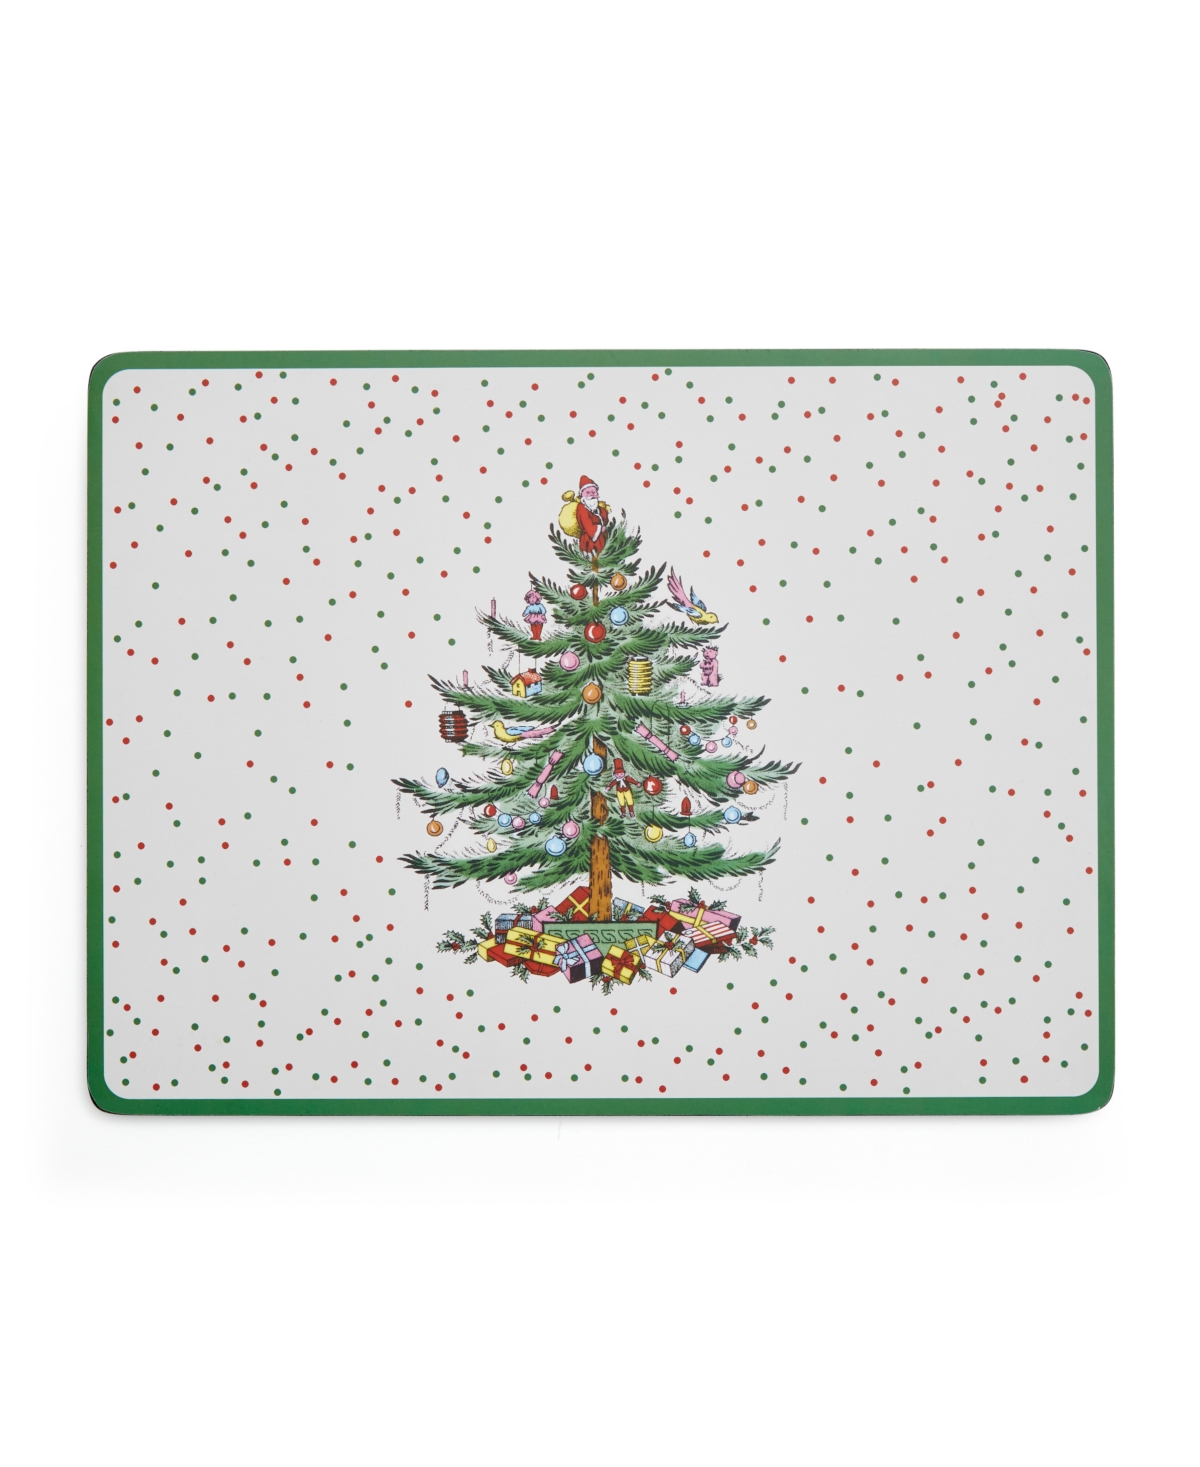 Christmas Tree Polka Dot 4 Piece Large Placemats Set, Service for 4 - Green